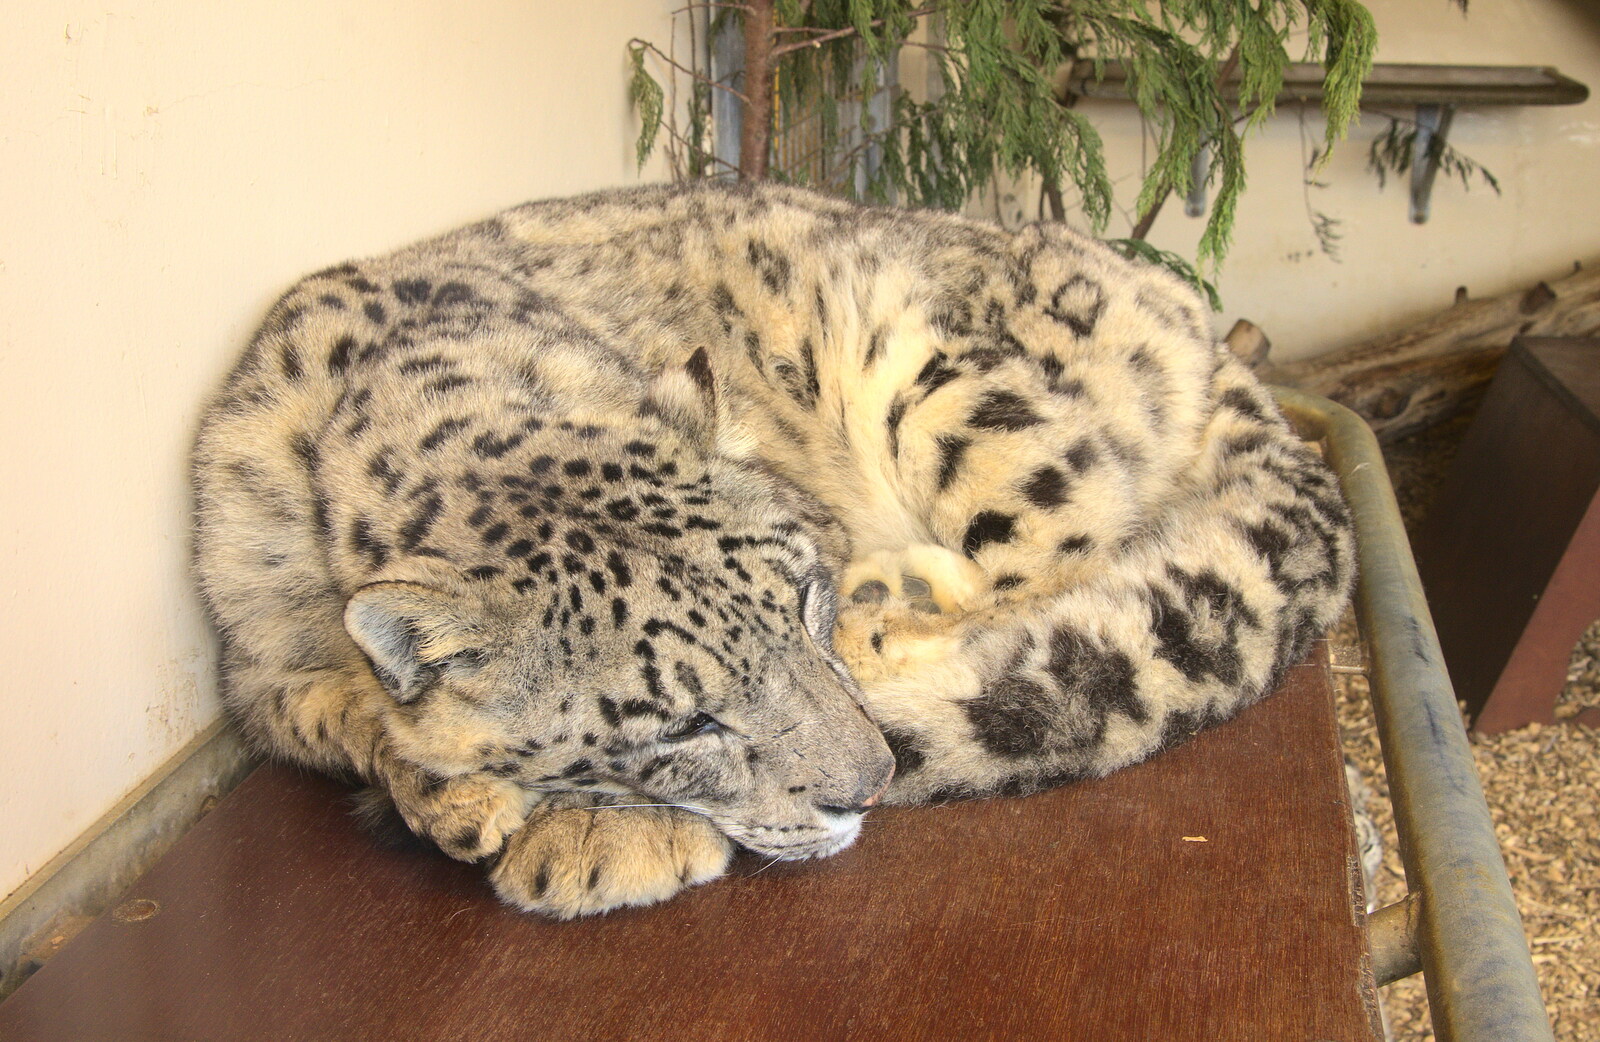 A snow leopard has a doze from Another Trip to Banham Zoo, Banham, Norfolk - 25th March 2016